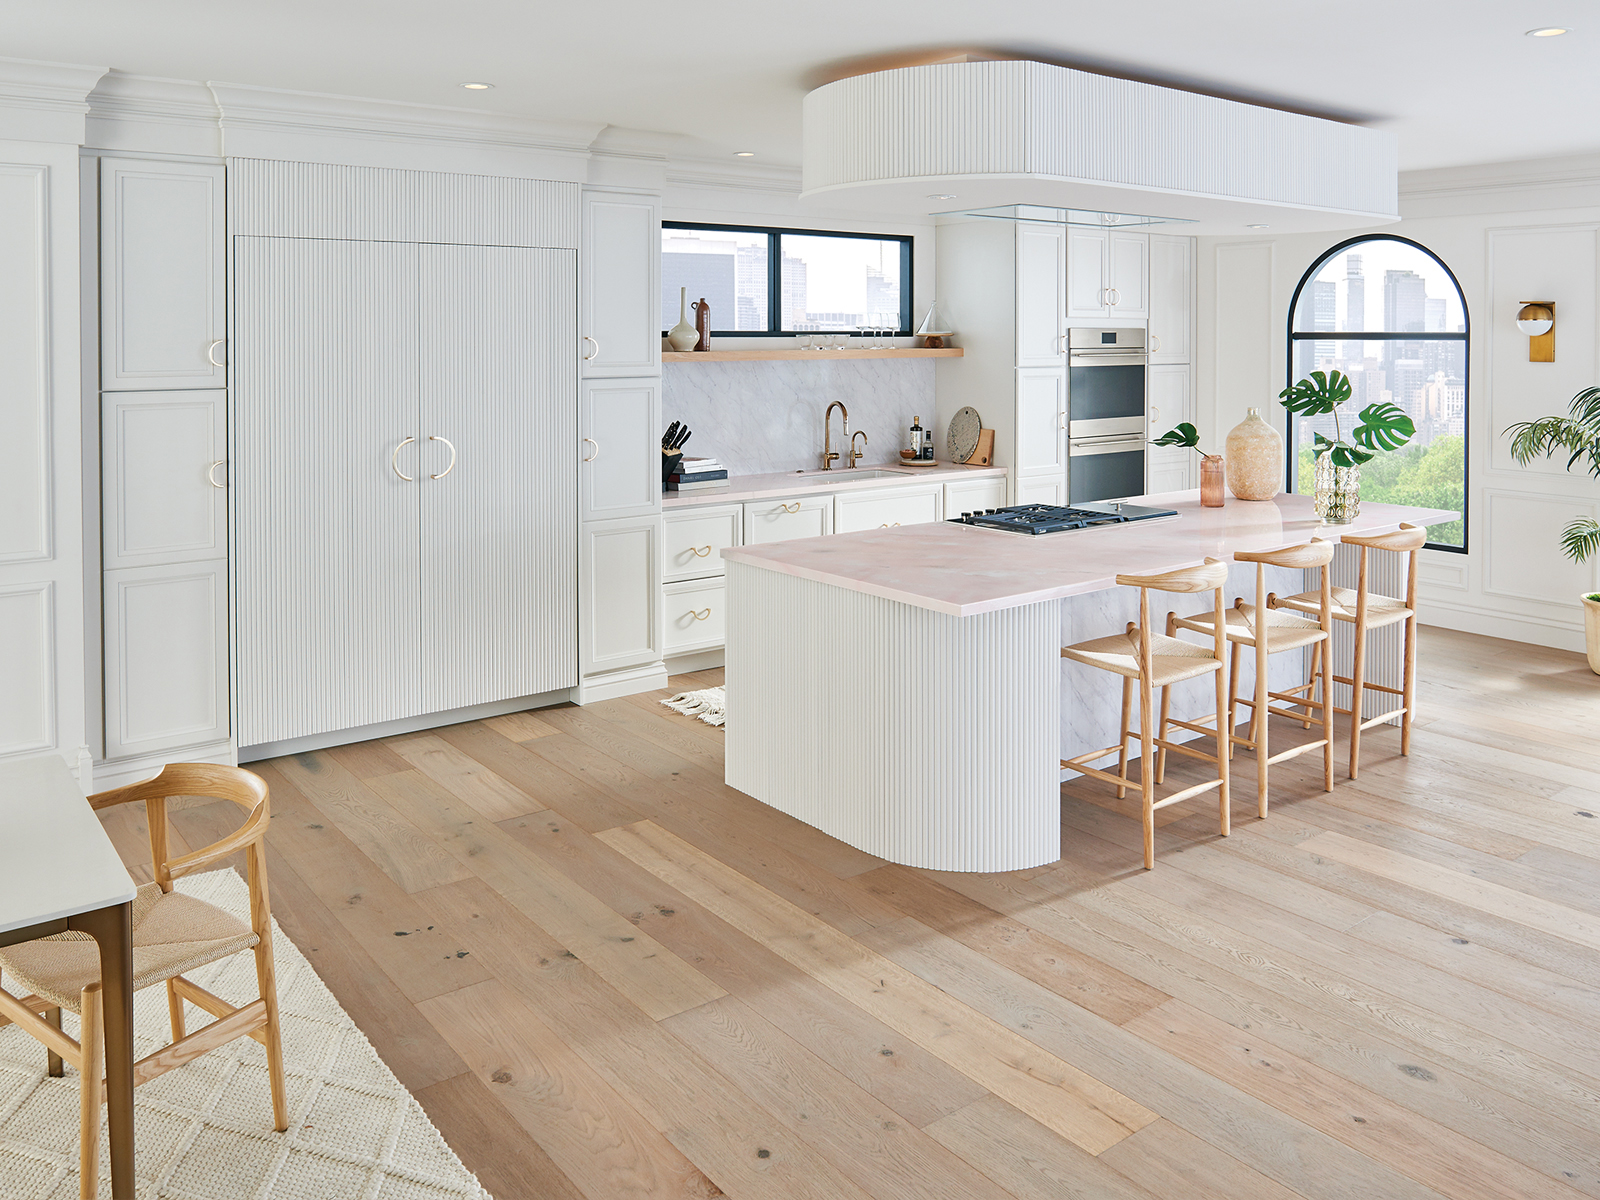 A bright white kitchen design remodeled with shaker and reeded cabinet doors.